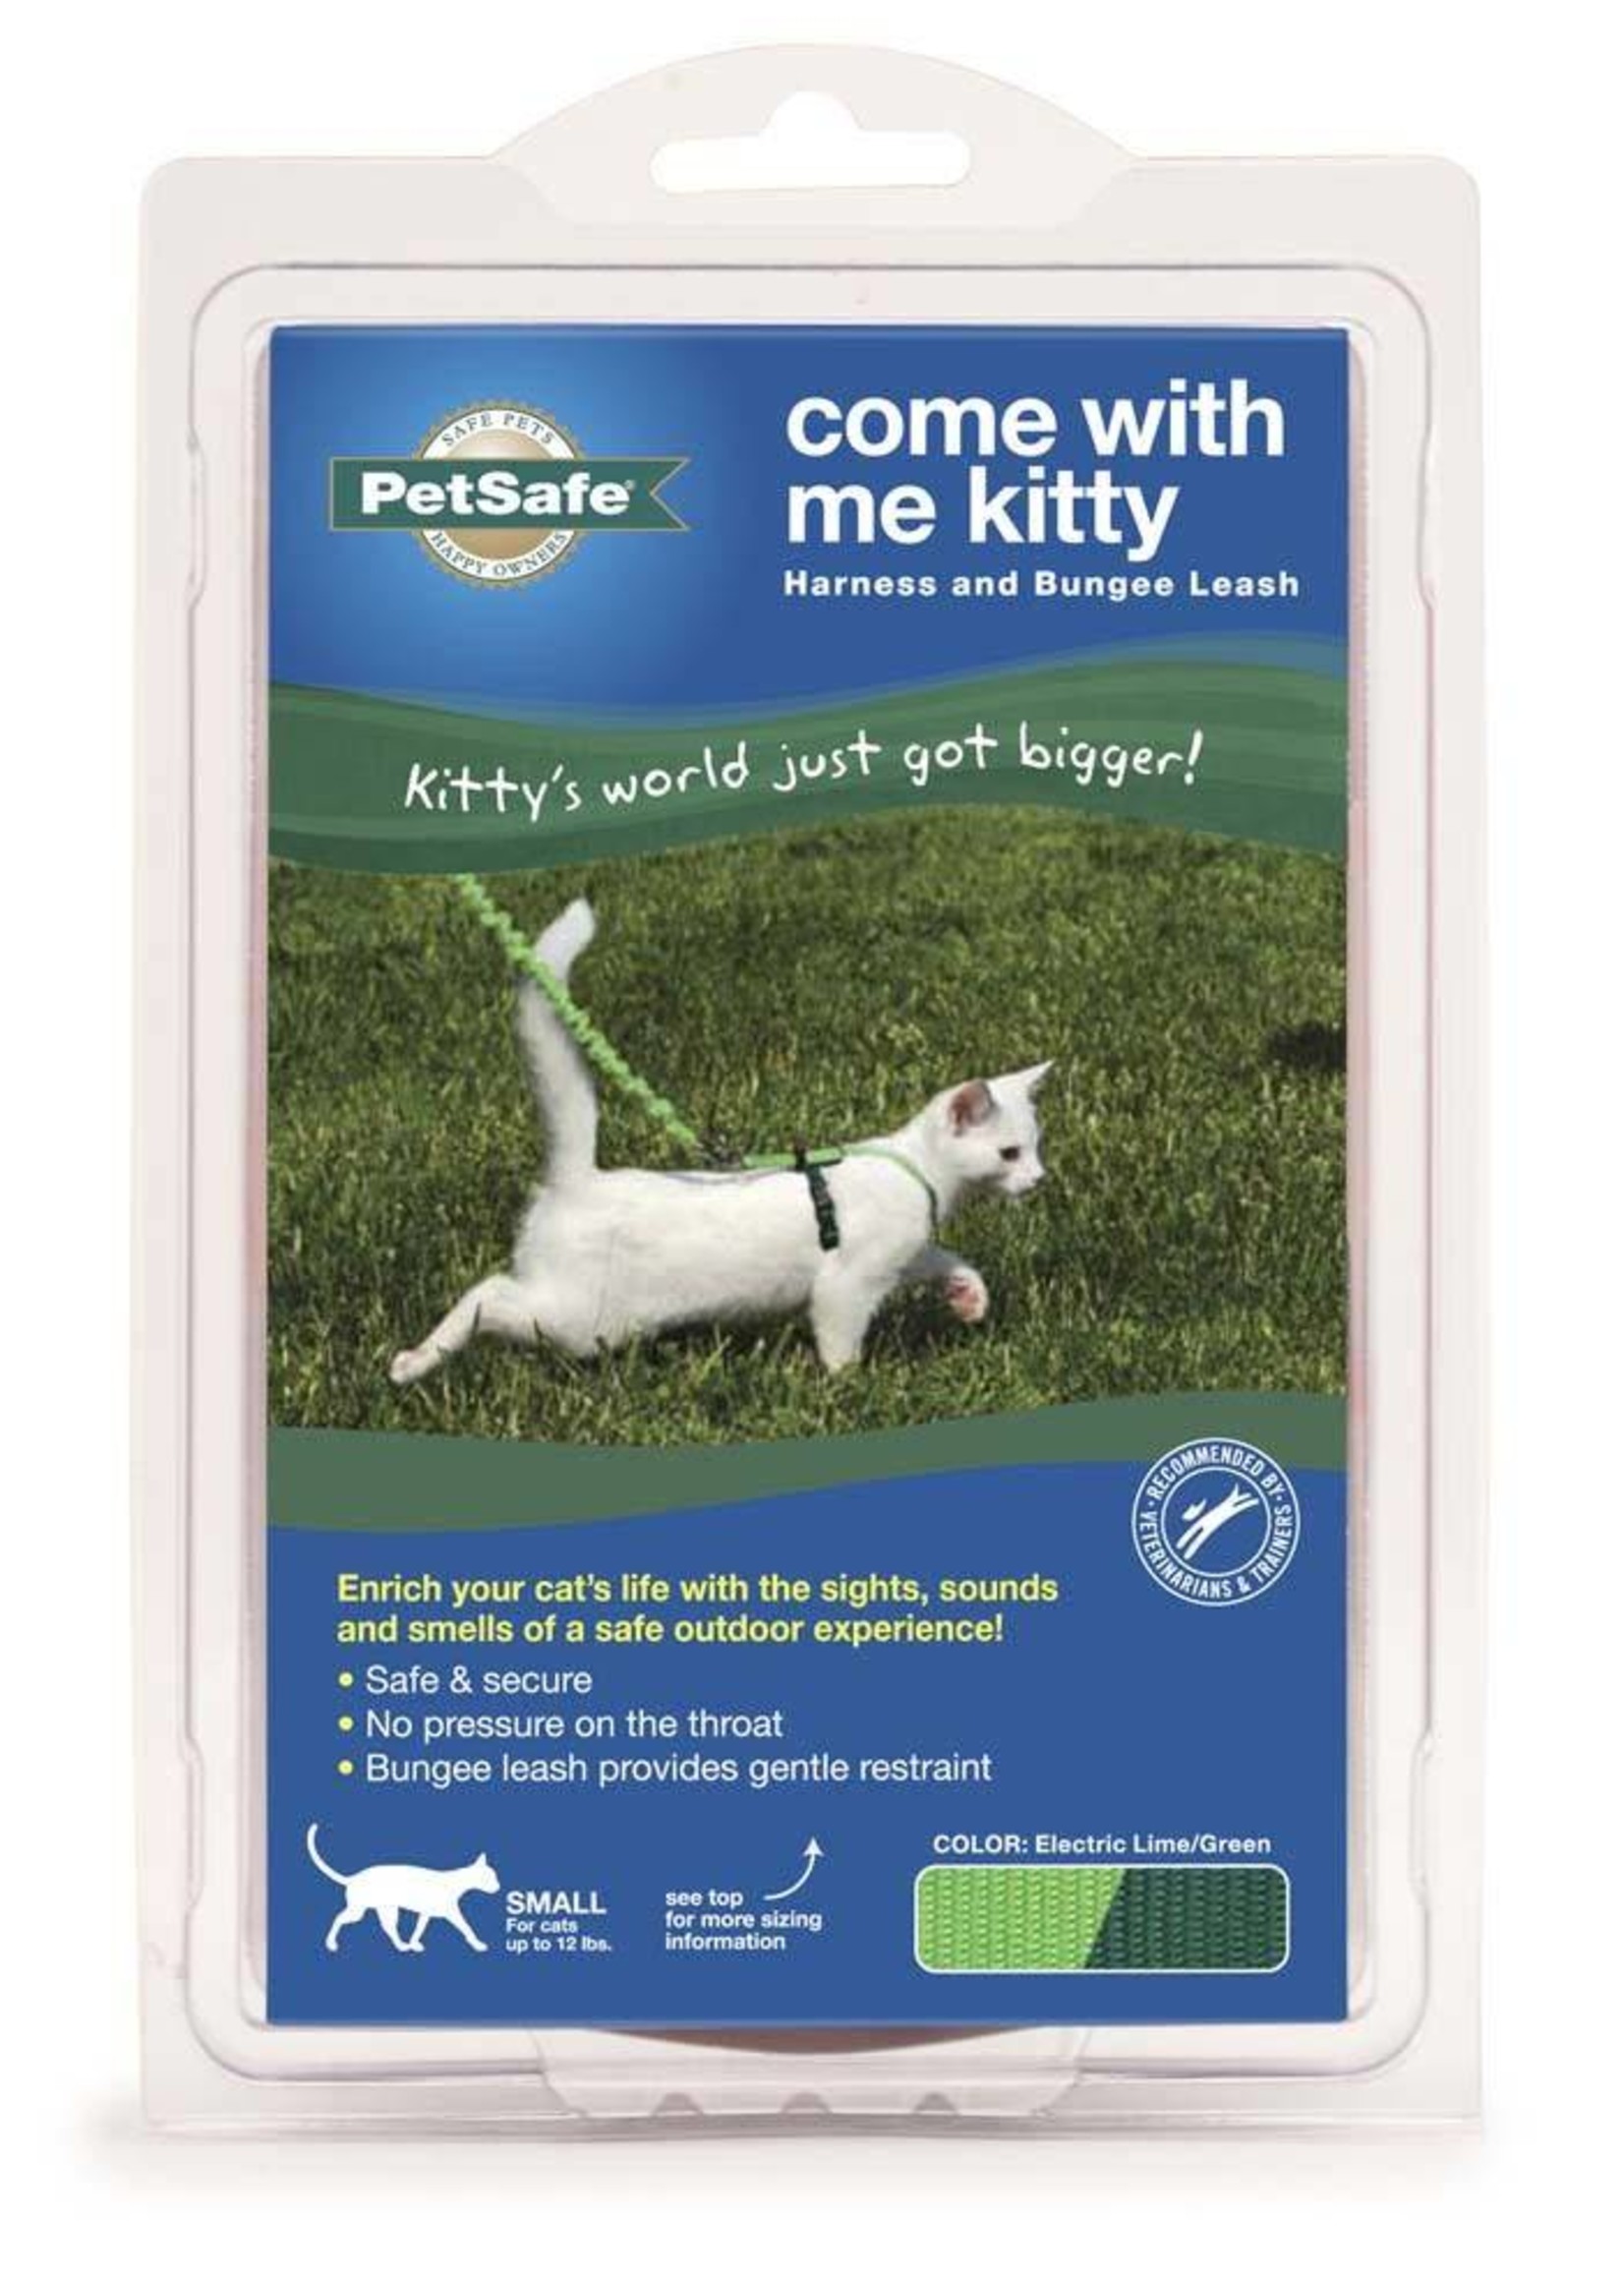 PREMIER PET - SLAVE TO #370 PetSafe Come With Me Kitty Harness & Bungee Leash Kitten/Small Electric Lime/Green